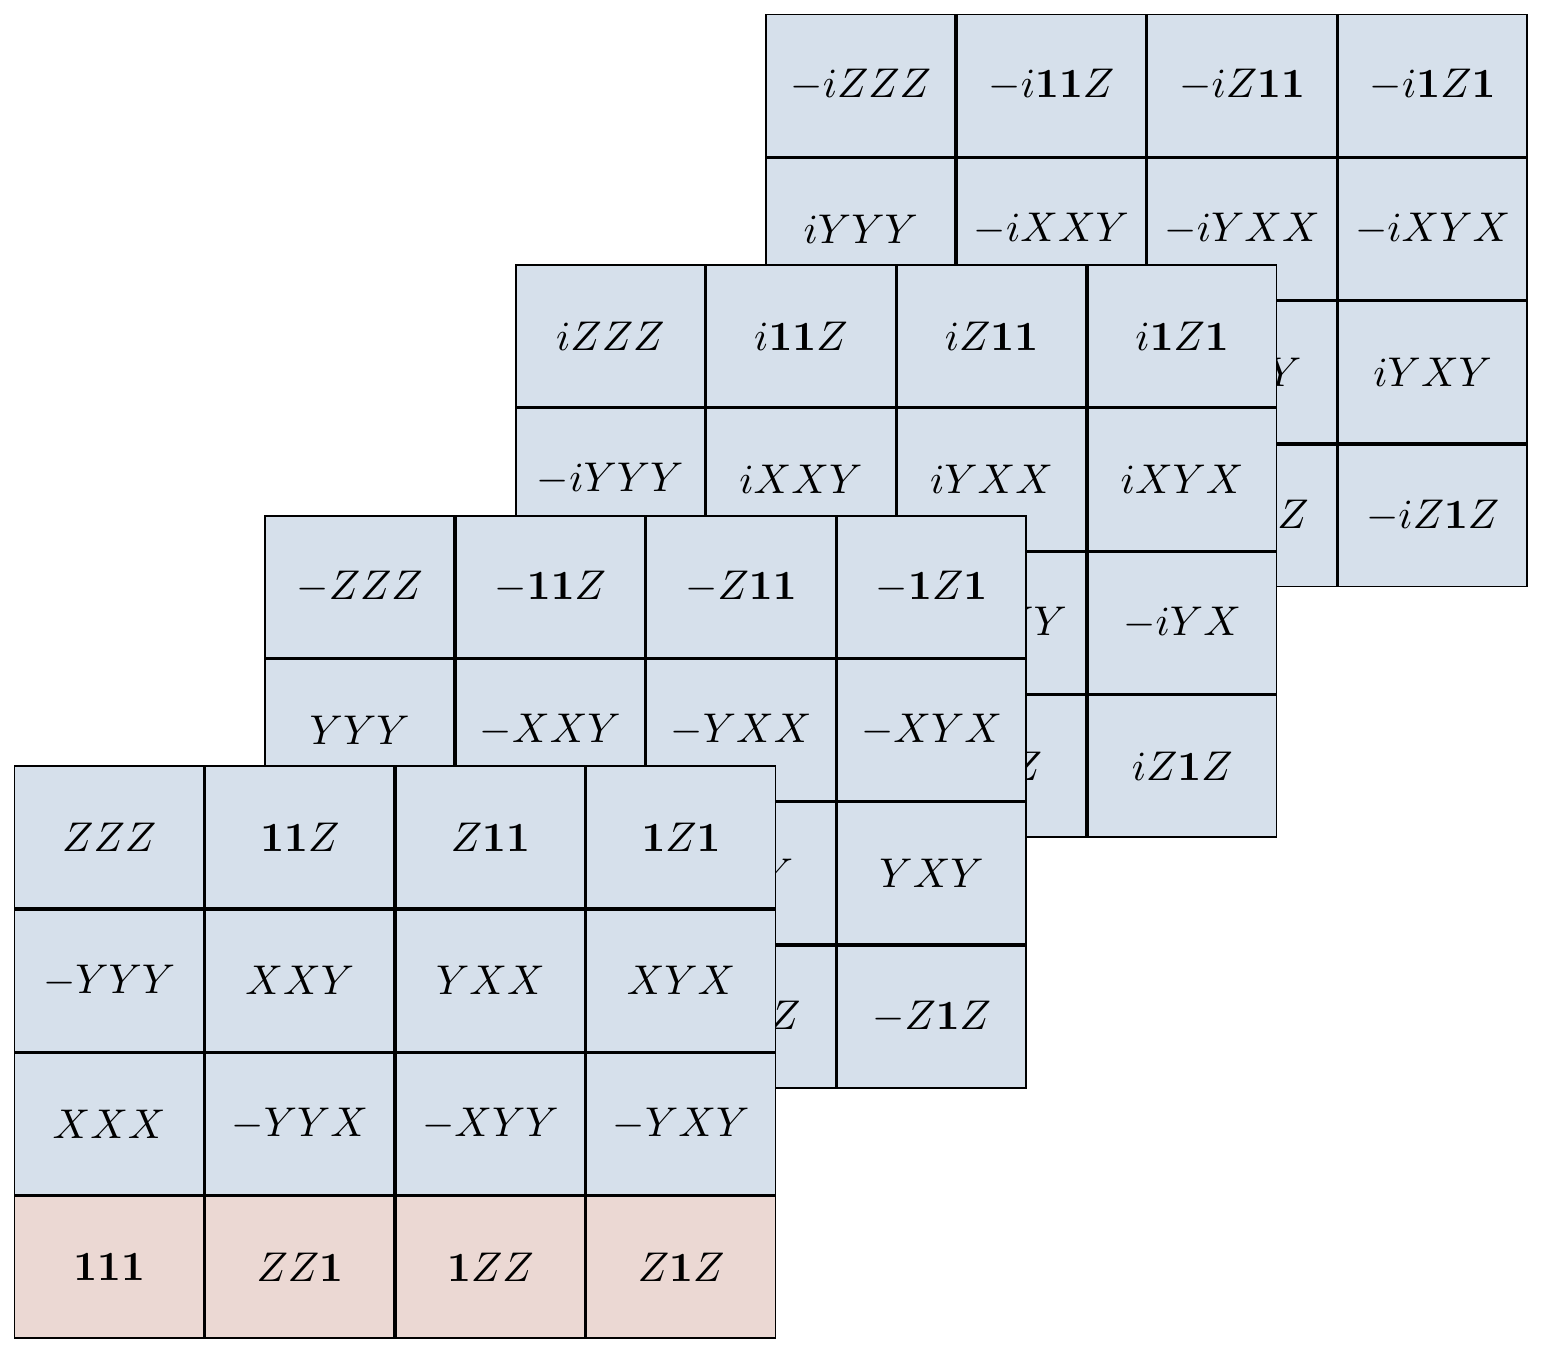 Here we have arranged the elements of the normaliser of \mathcal{S} so that each row represents a coset of \mathcal{S} in N(\mathcal{S}). The quotient group N(\mathcal{S})/\mathcal{S} is isomorphic to the Pauli group \mathcal{P}_1, and you can see this by considering the first column (which is the representative for that row/coset) of the frontmost page: the four operators \mathbf{1}\mathbf{1}\mathbf{1}, XXX, -YYY, and ZZZ behave, algebraically, exactly the same as \mathbf{1}, X, Y, and Z (in that they satisfy the same commutation relations). Note that it is indeed -YYY that behaves like Y, not +YYY.